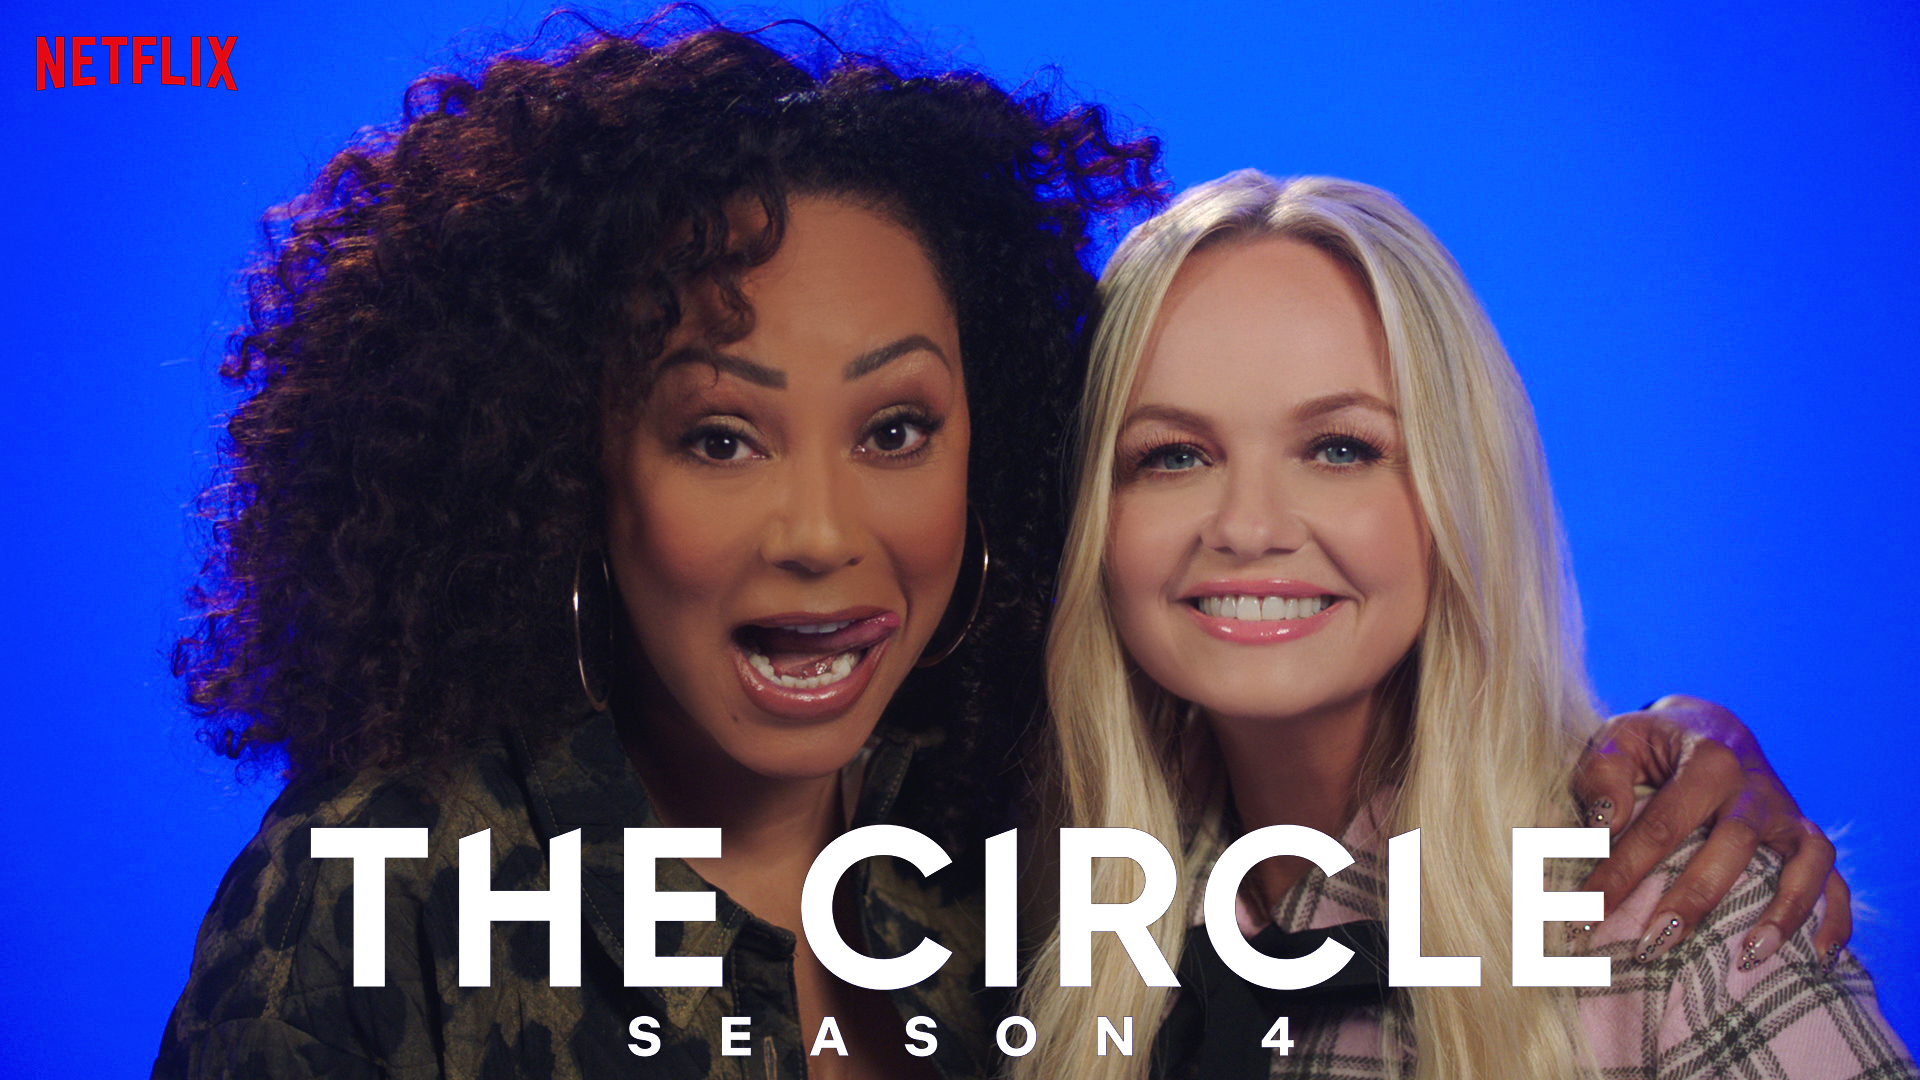 Netflix's hit reality series, The Circle, adds two Spice Girls to heat things up.